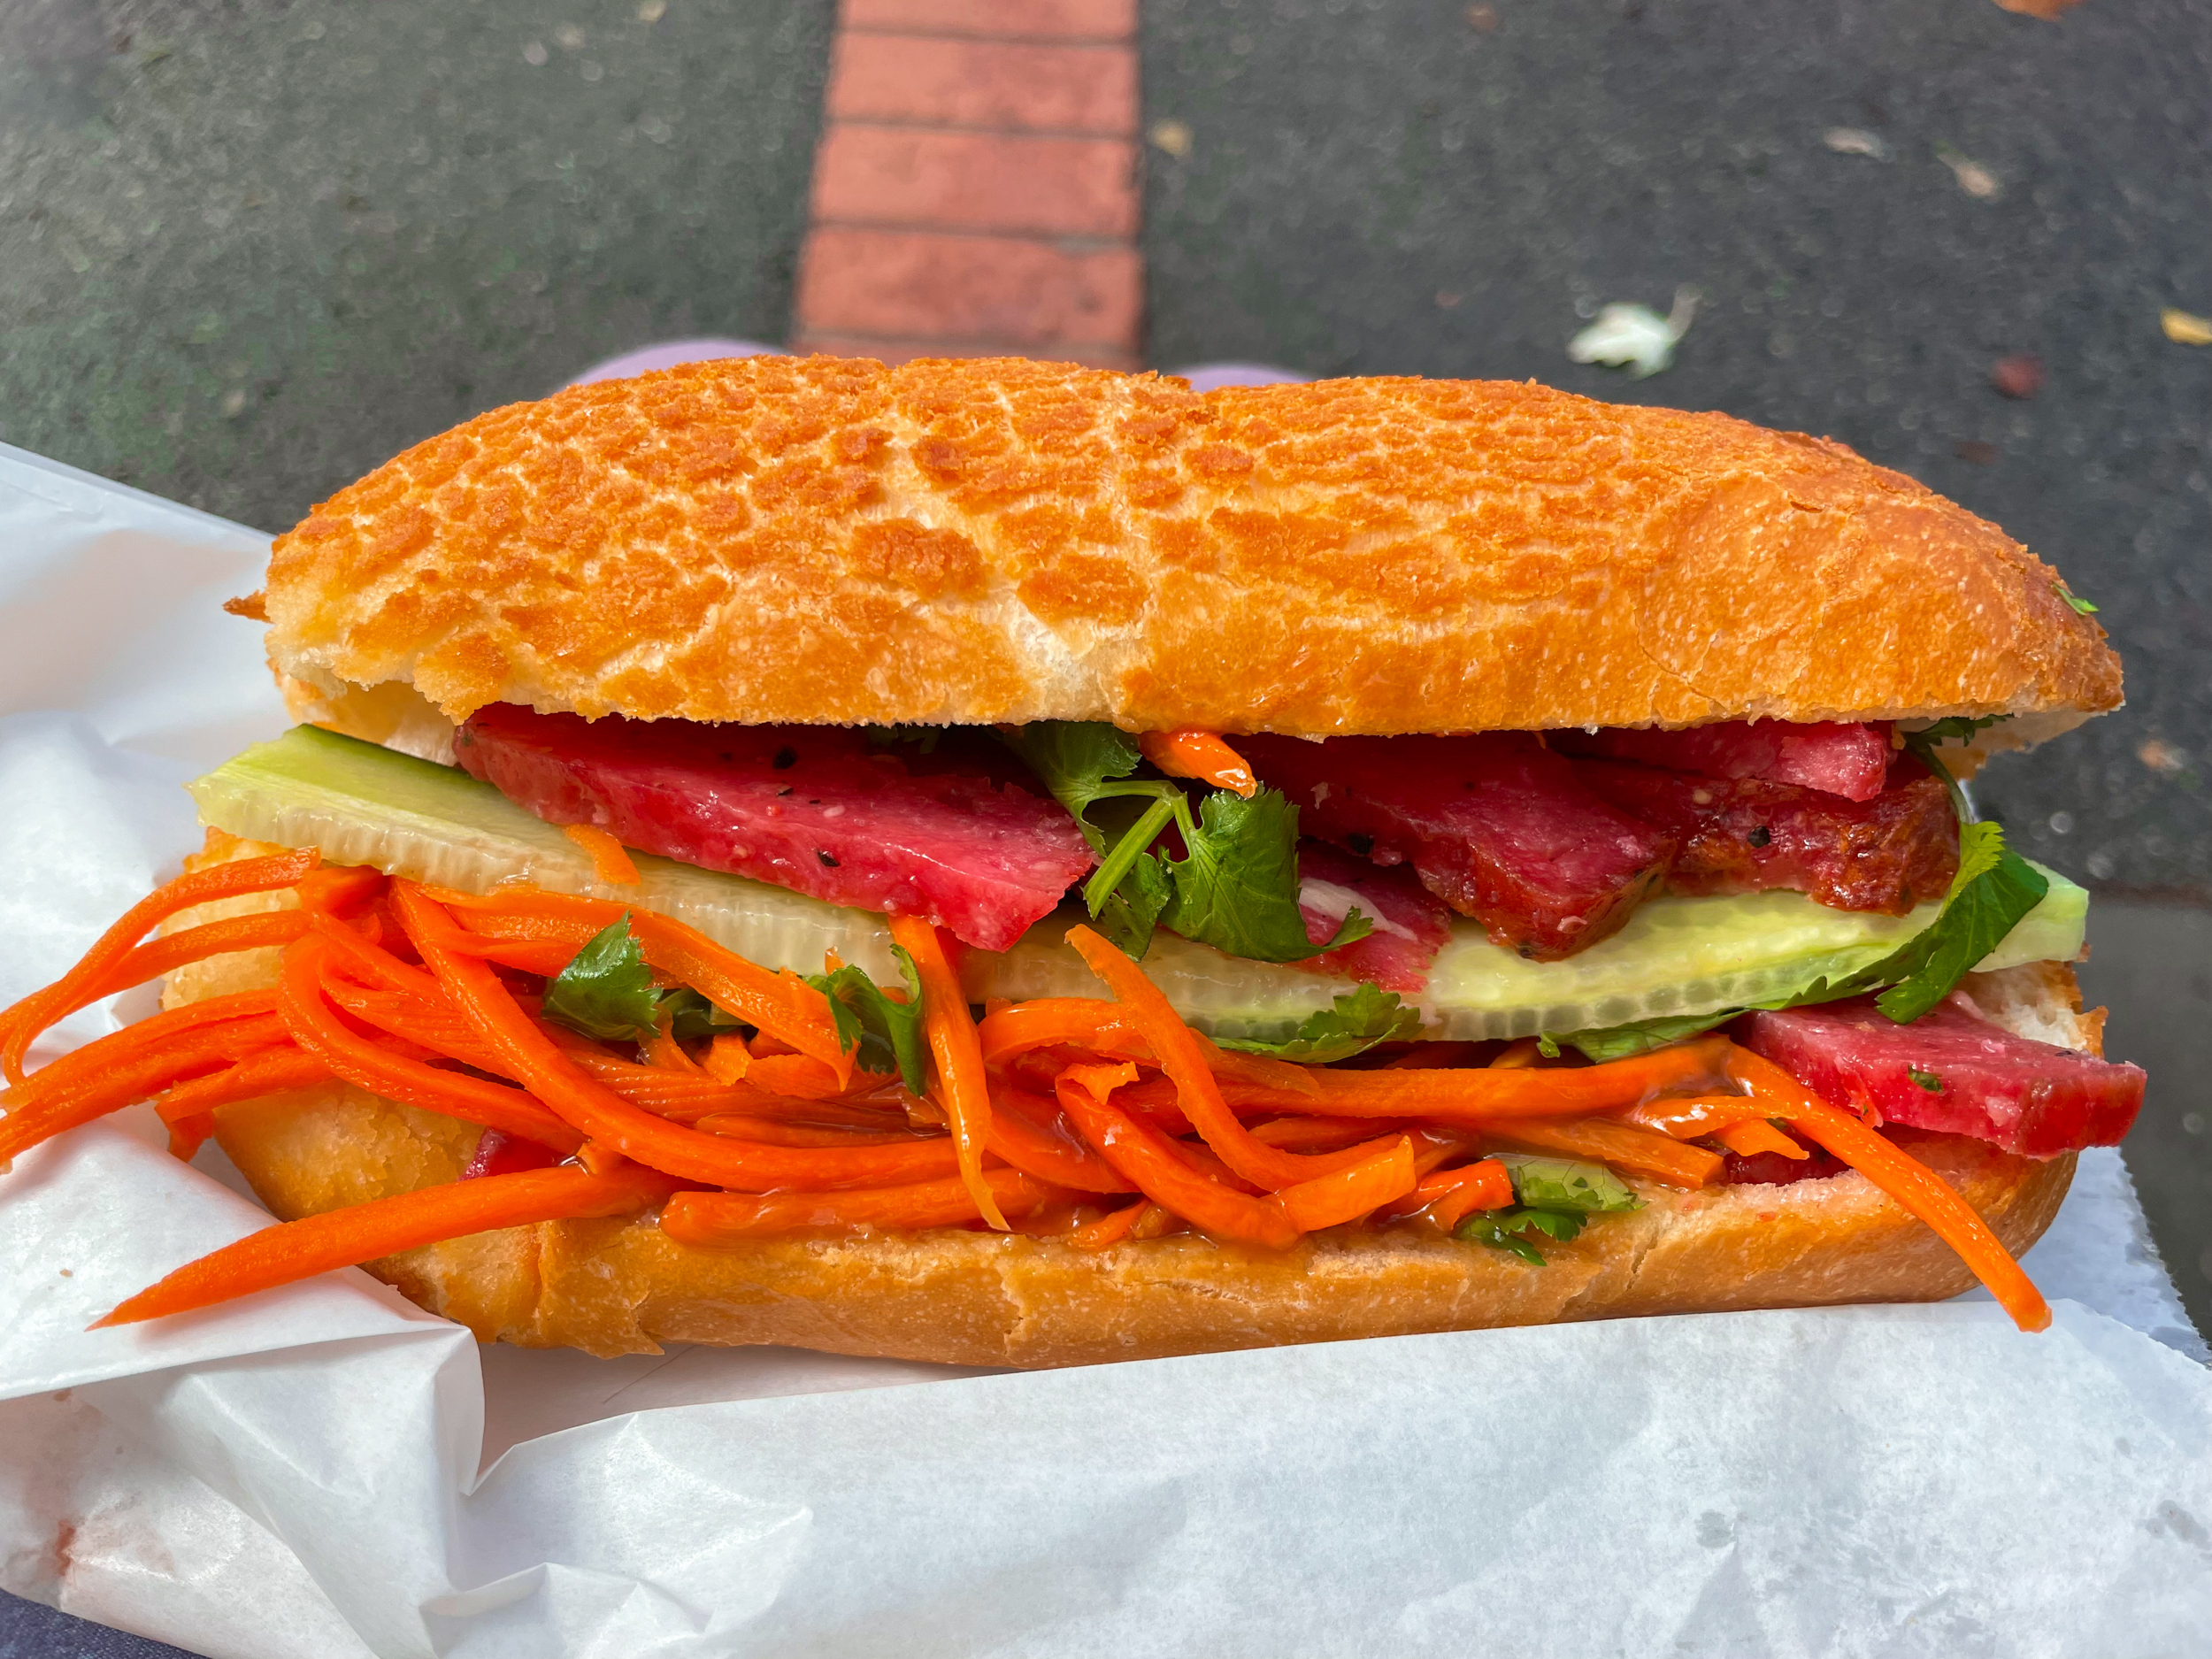 Banh mi tiger bread roll with pink pork, cucumber, and other fillings inside. Sitting on paper bag